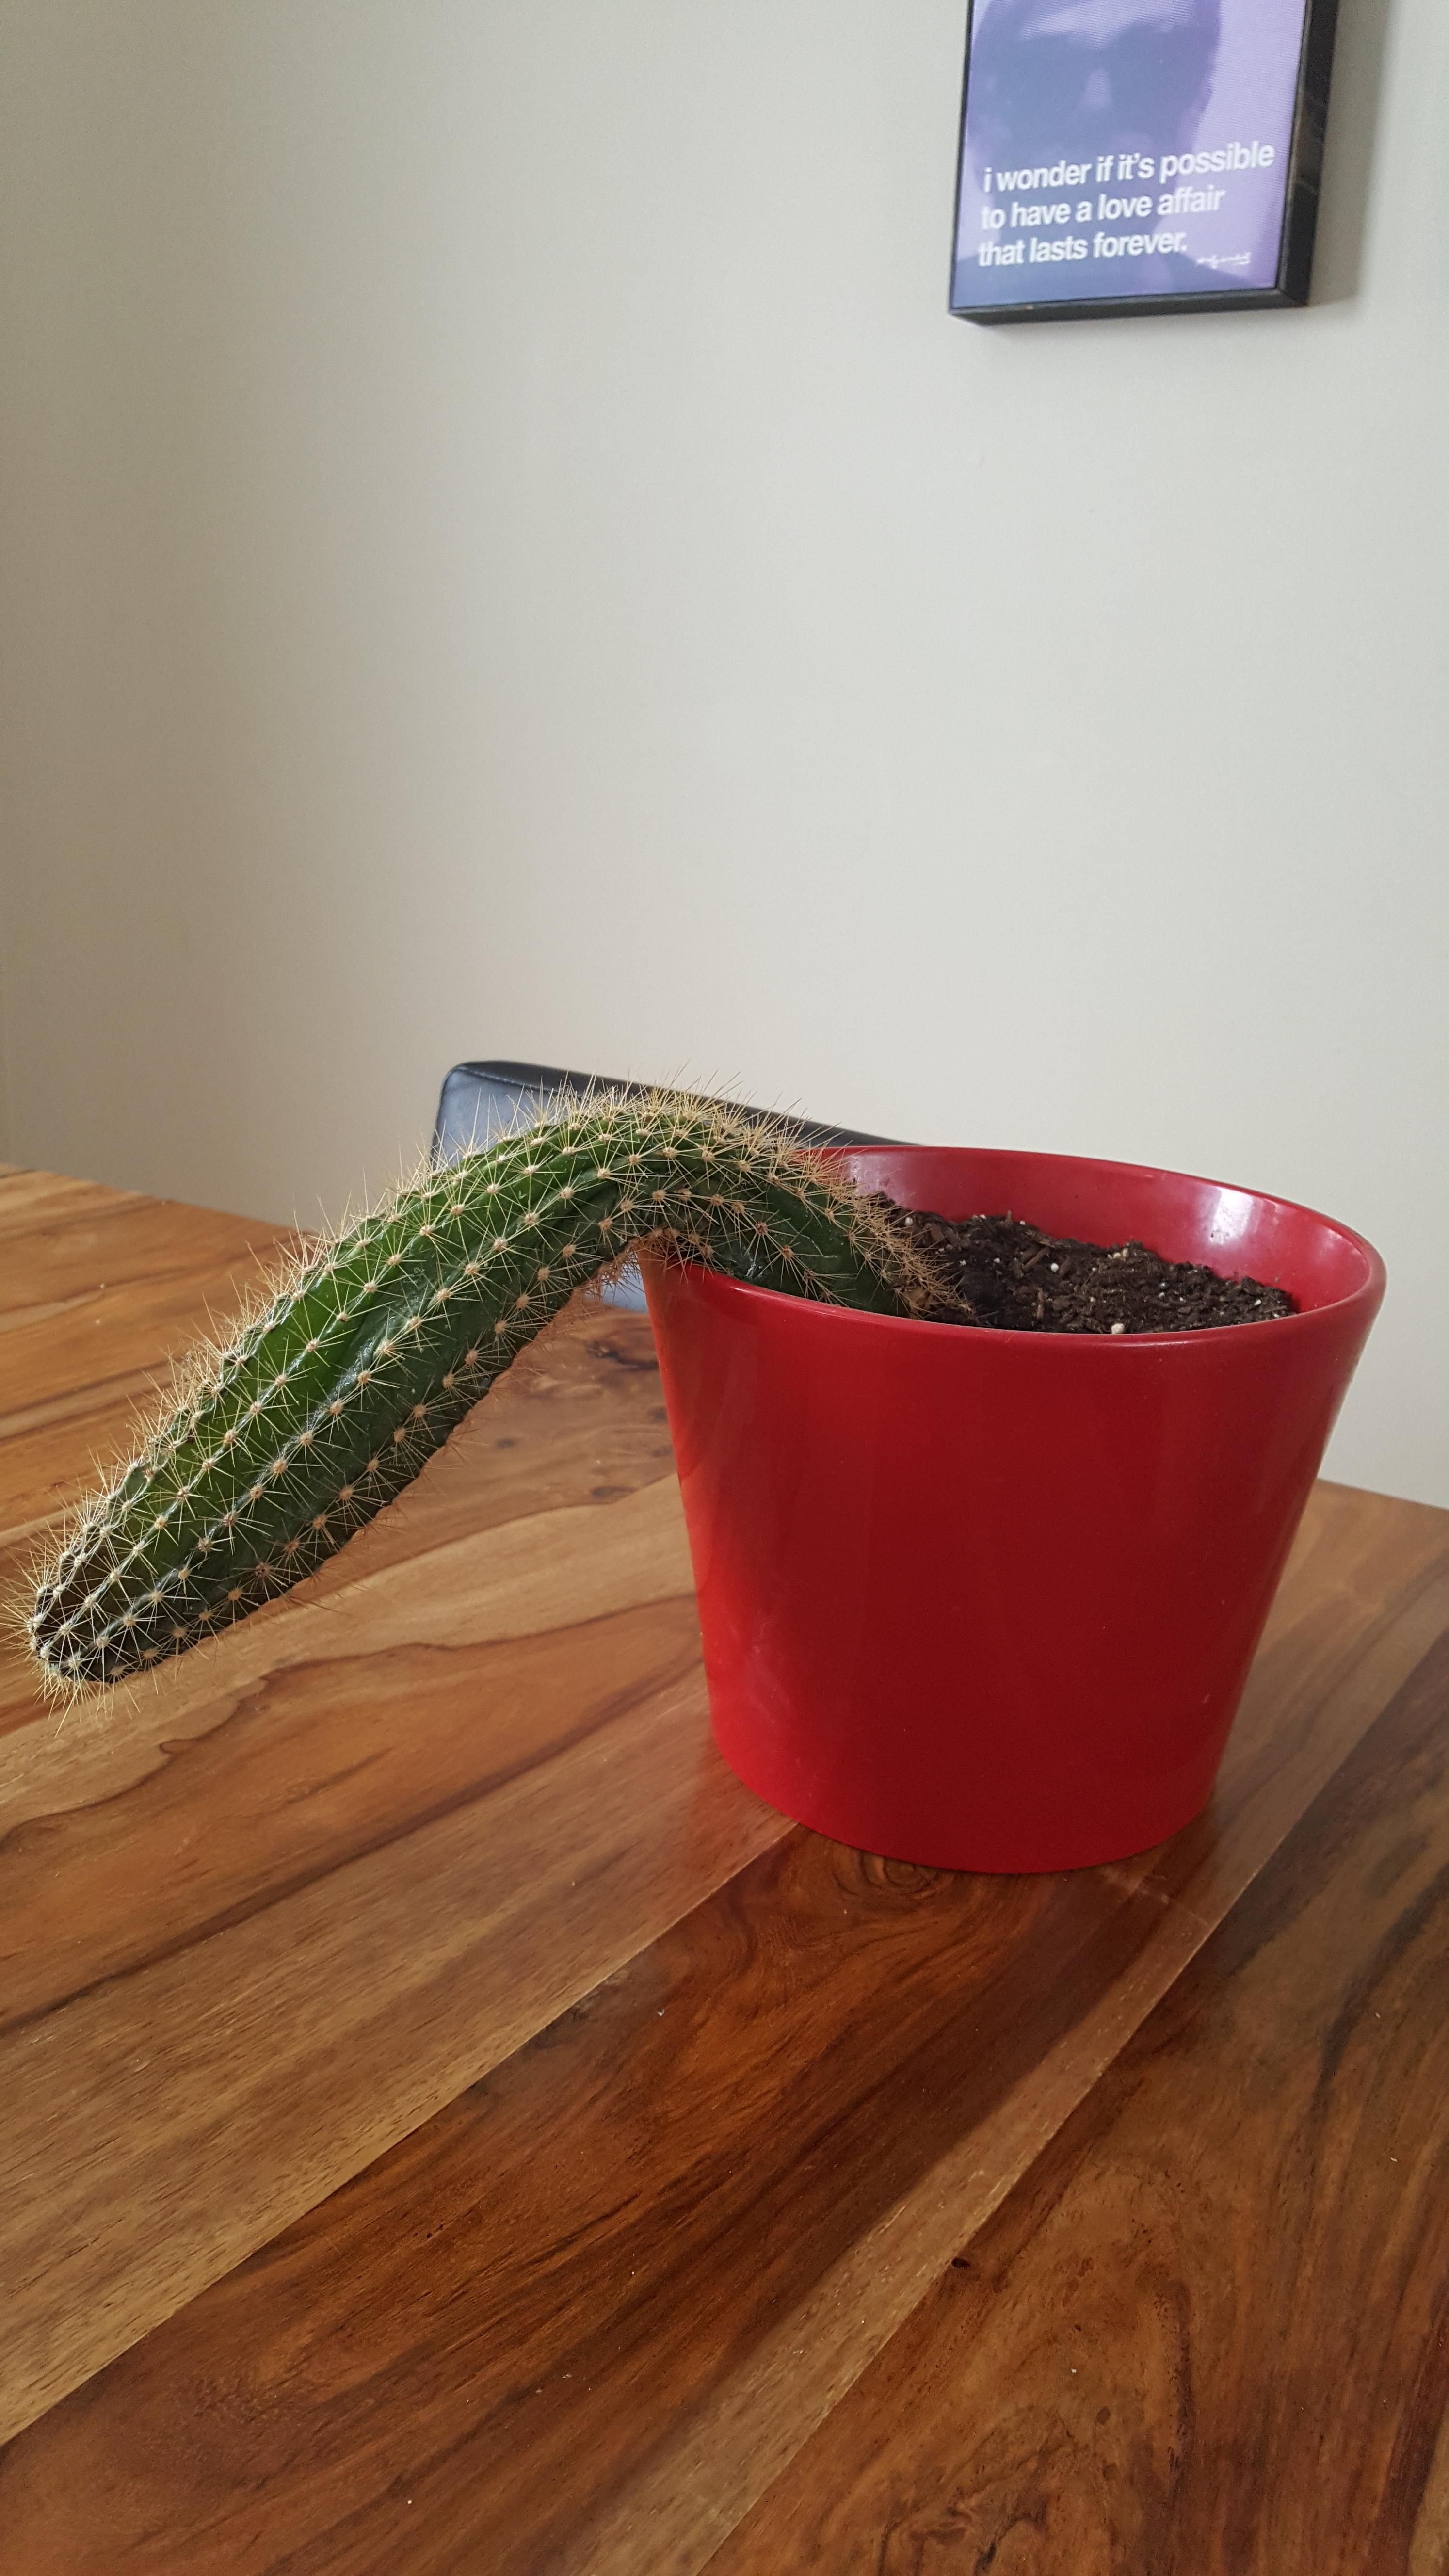 Today I adopted a friends beloved cactus that she's had for 10 years . First day in his new home and my 5 year old thought he looked thirsty ... RIP Ted